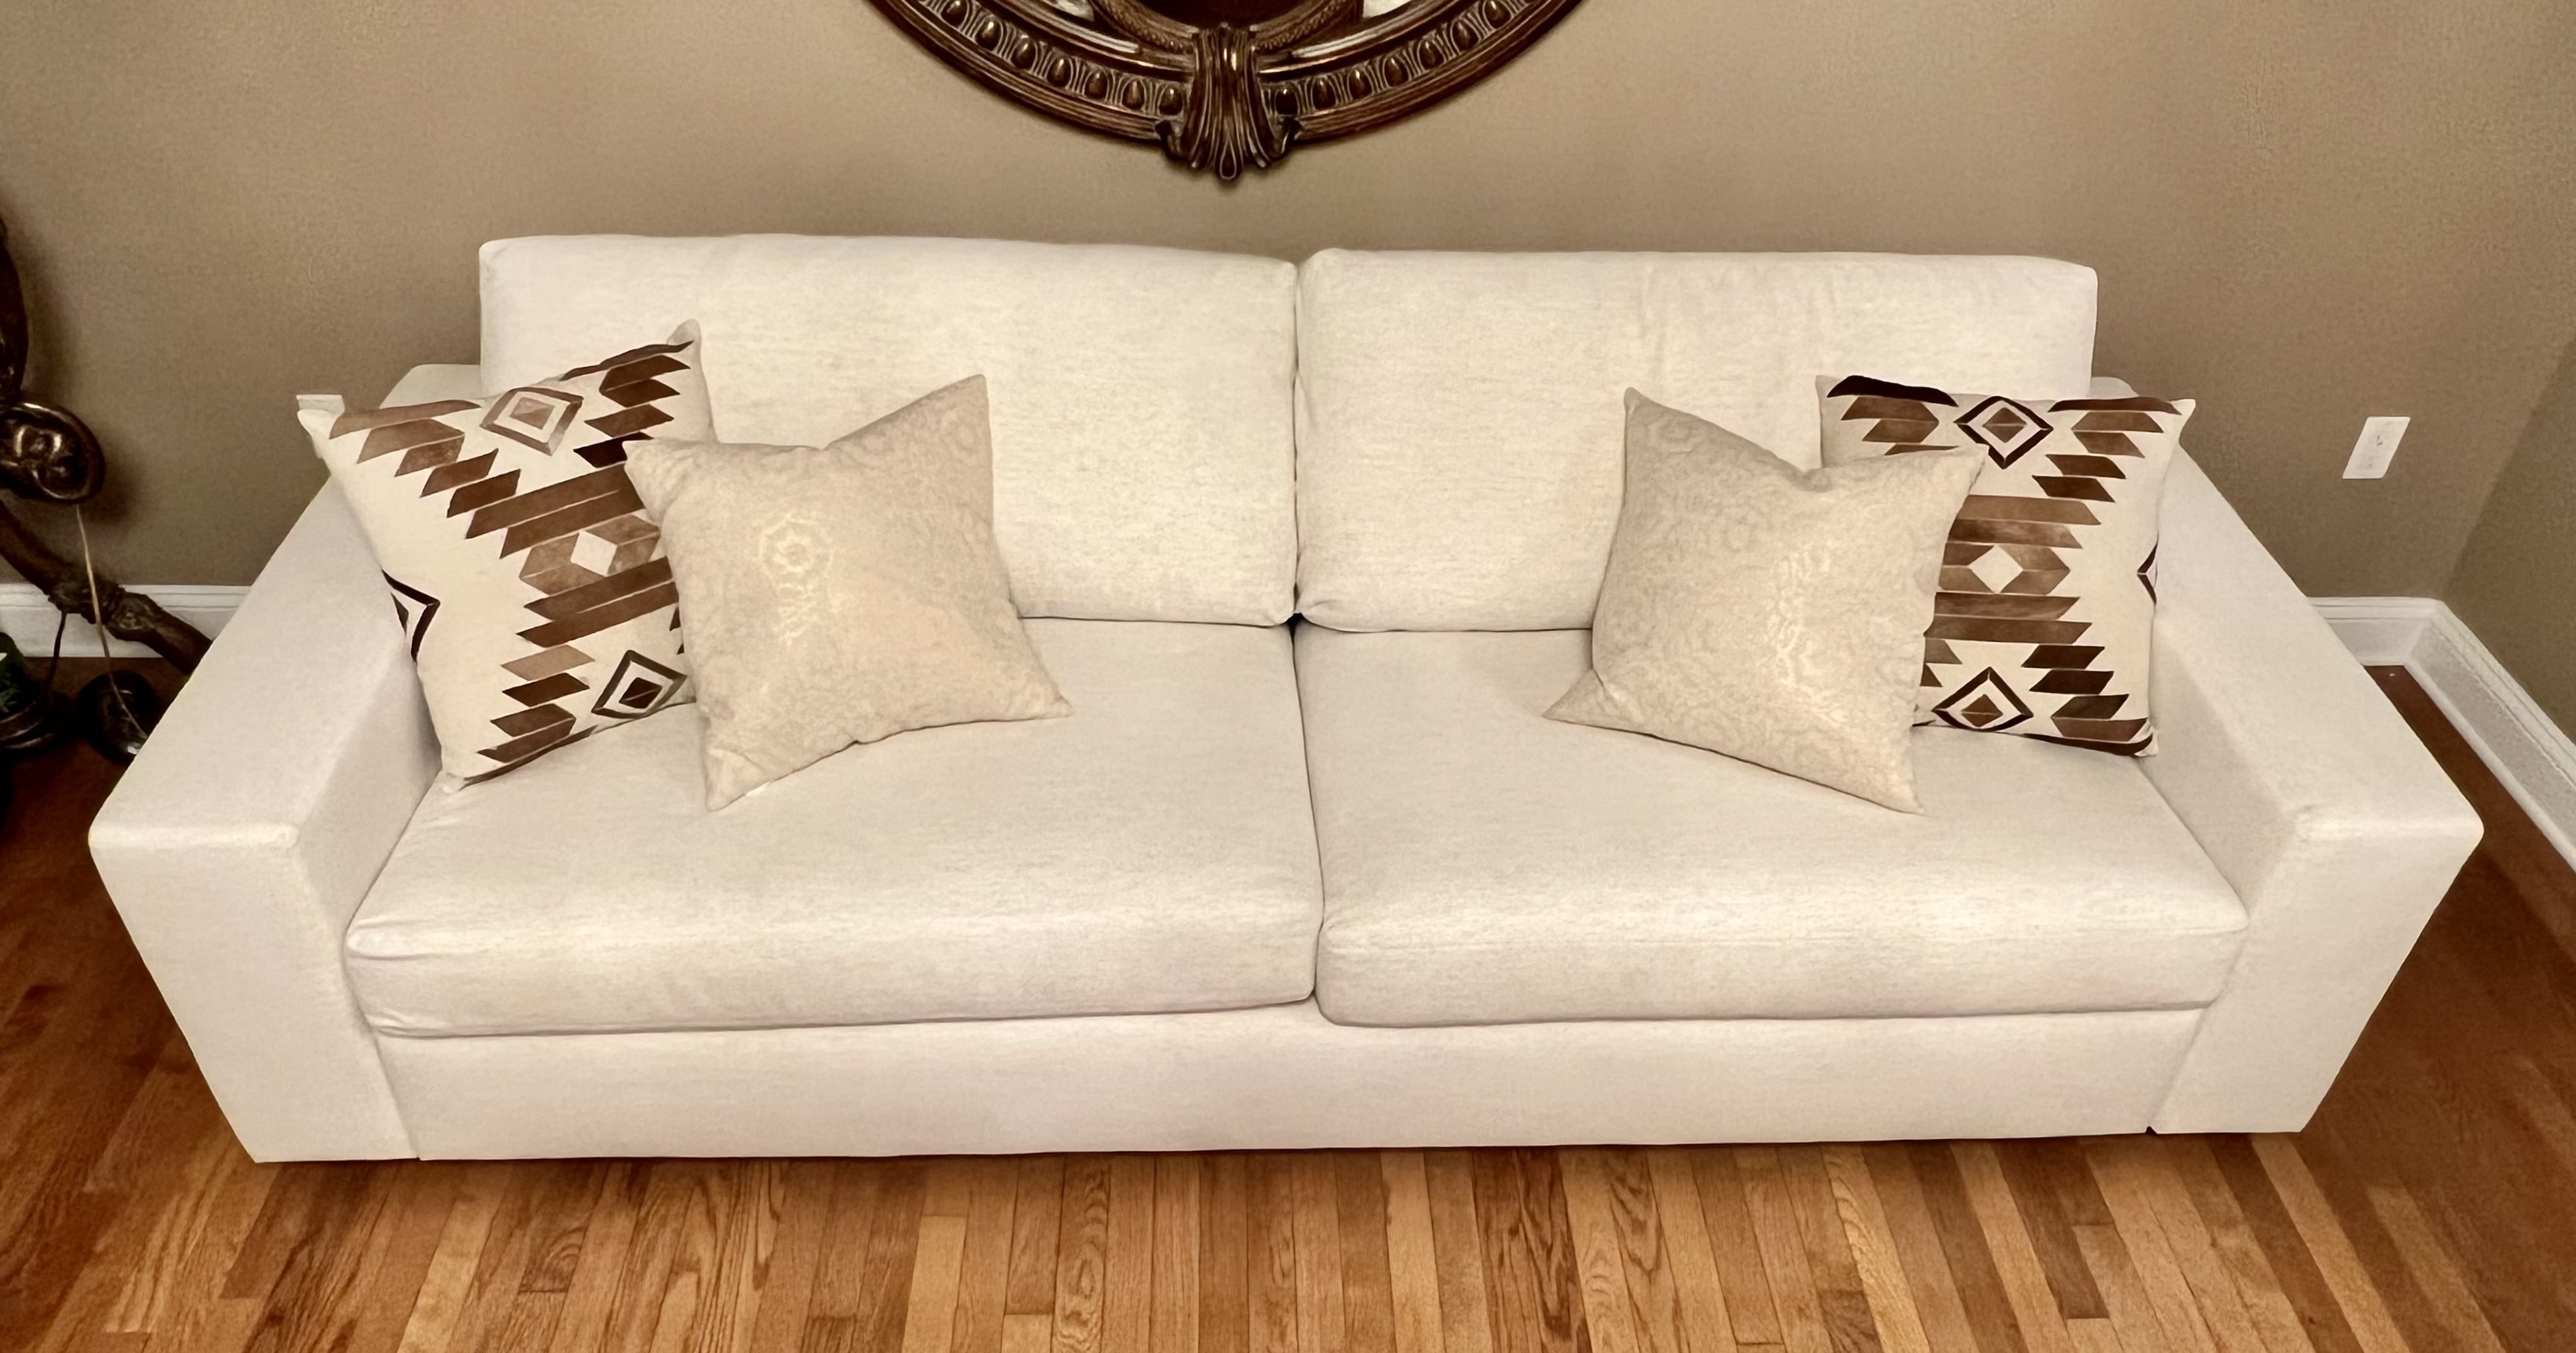 I Tested Out Albany Park’s Barton Sofa and It’s Made For Lounging